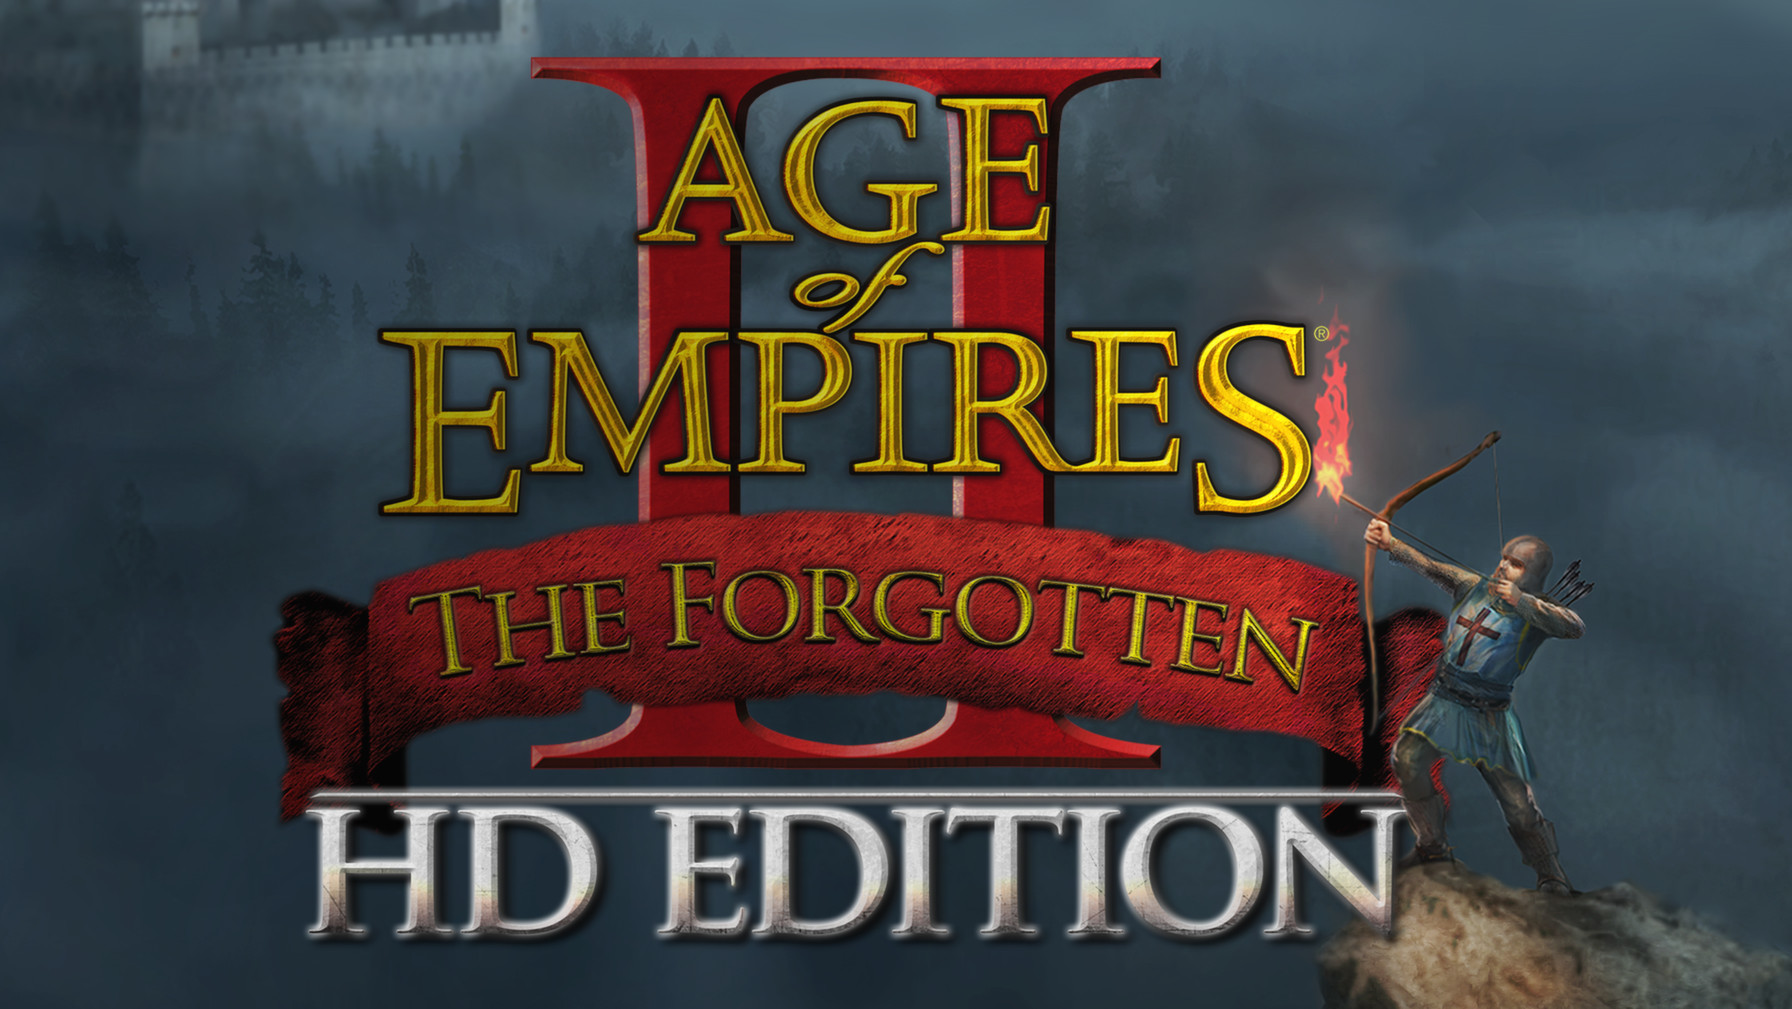 Age of Empires II (2013): The Forgotten Featured Screenshot #1